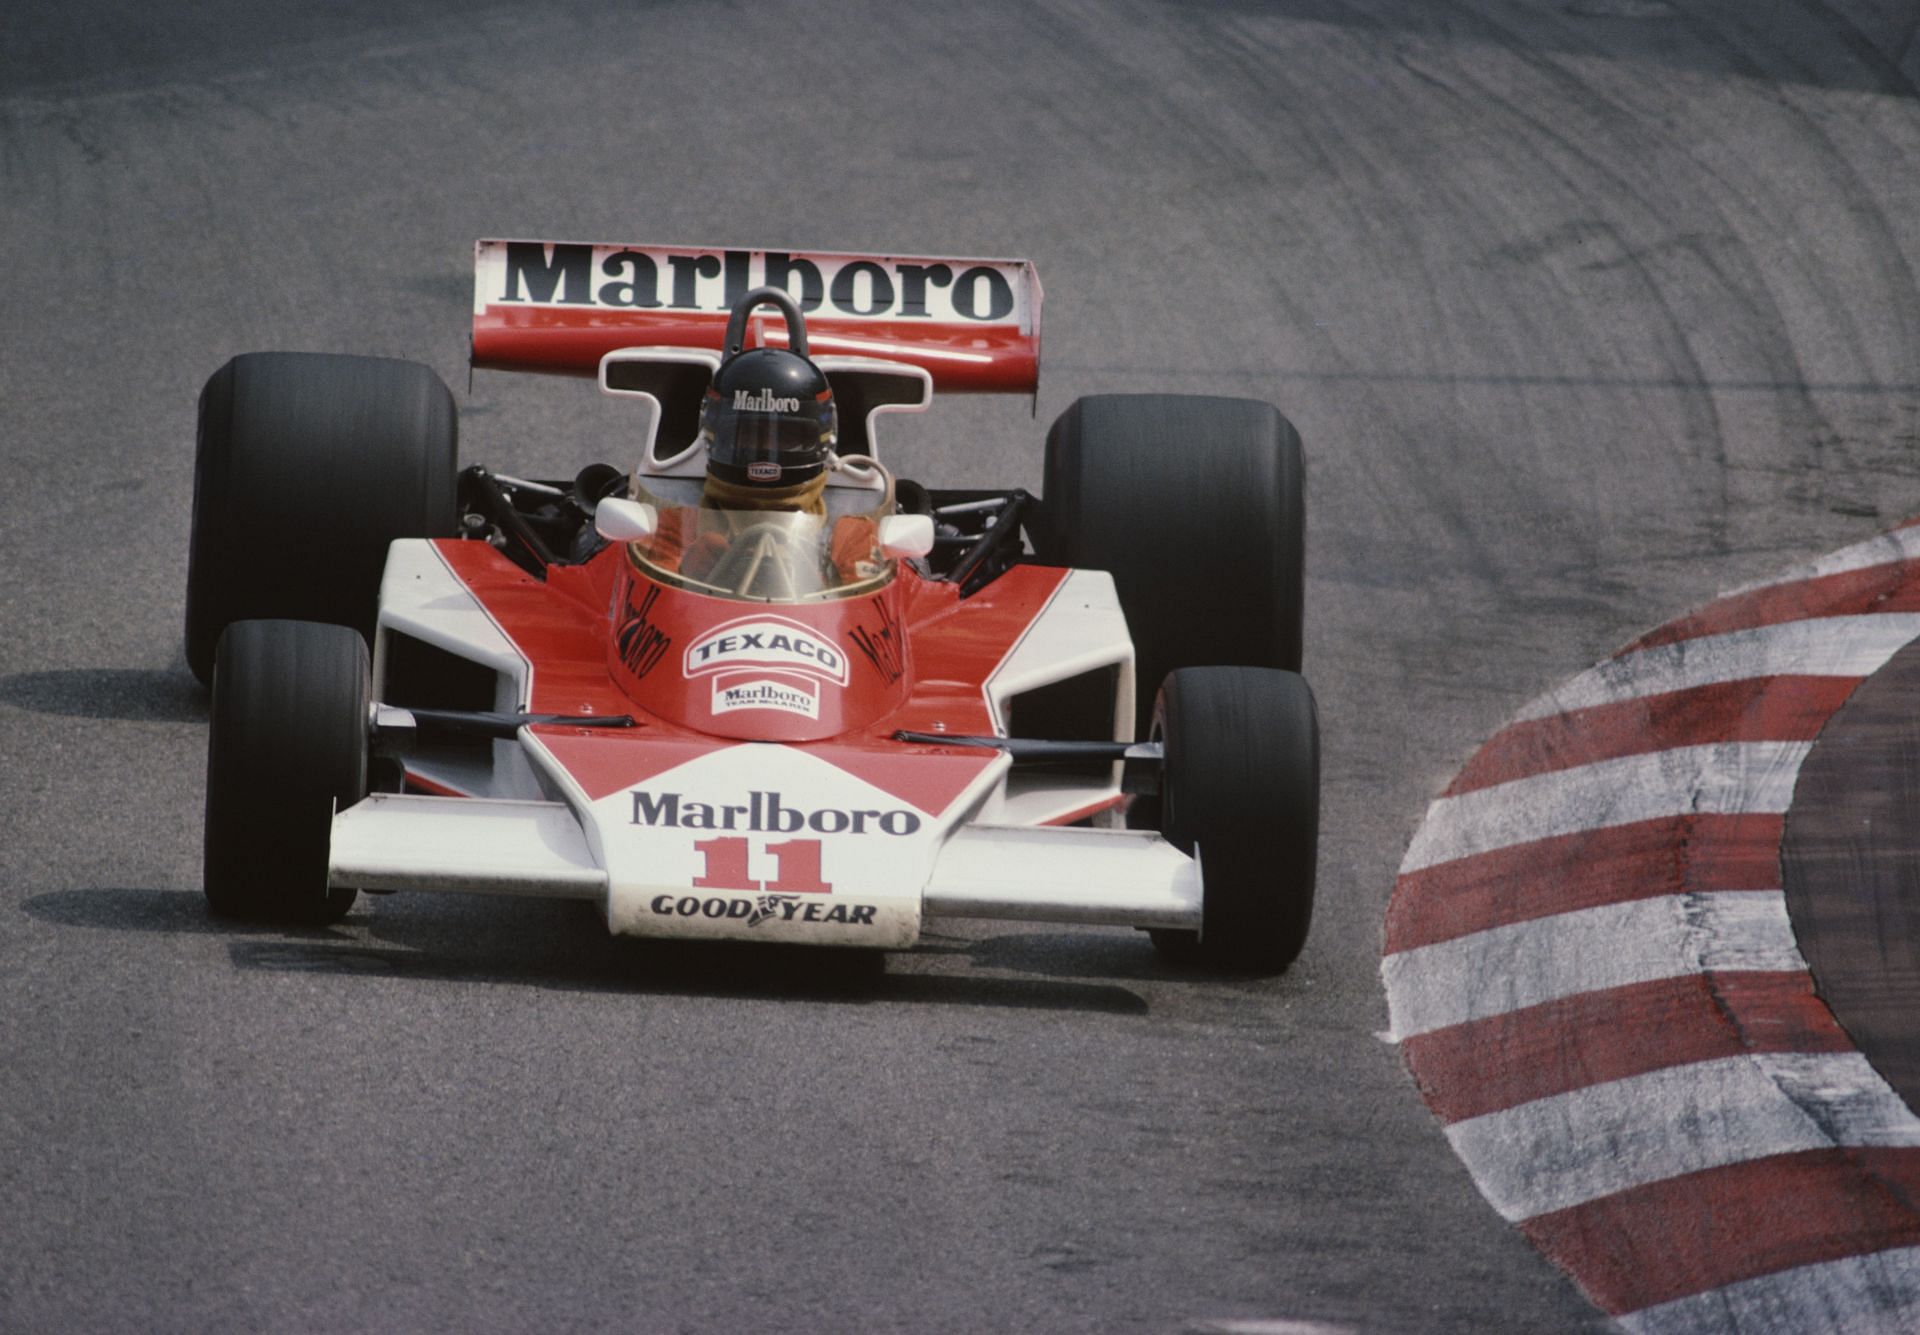 James Hunt of Great Britain drives the #11 Marlboro Team McLaren McLaren M23 Ford Cosworth V8 during, the Grand Prix of Monaco on 30th May 1976. (Photo by Tony Duffy/Getty Images)